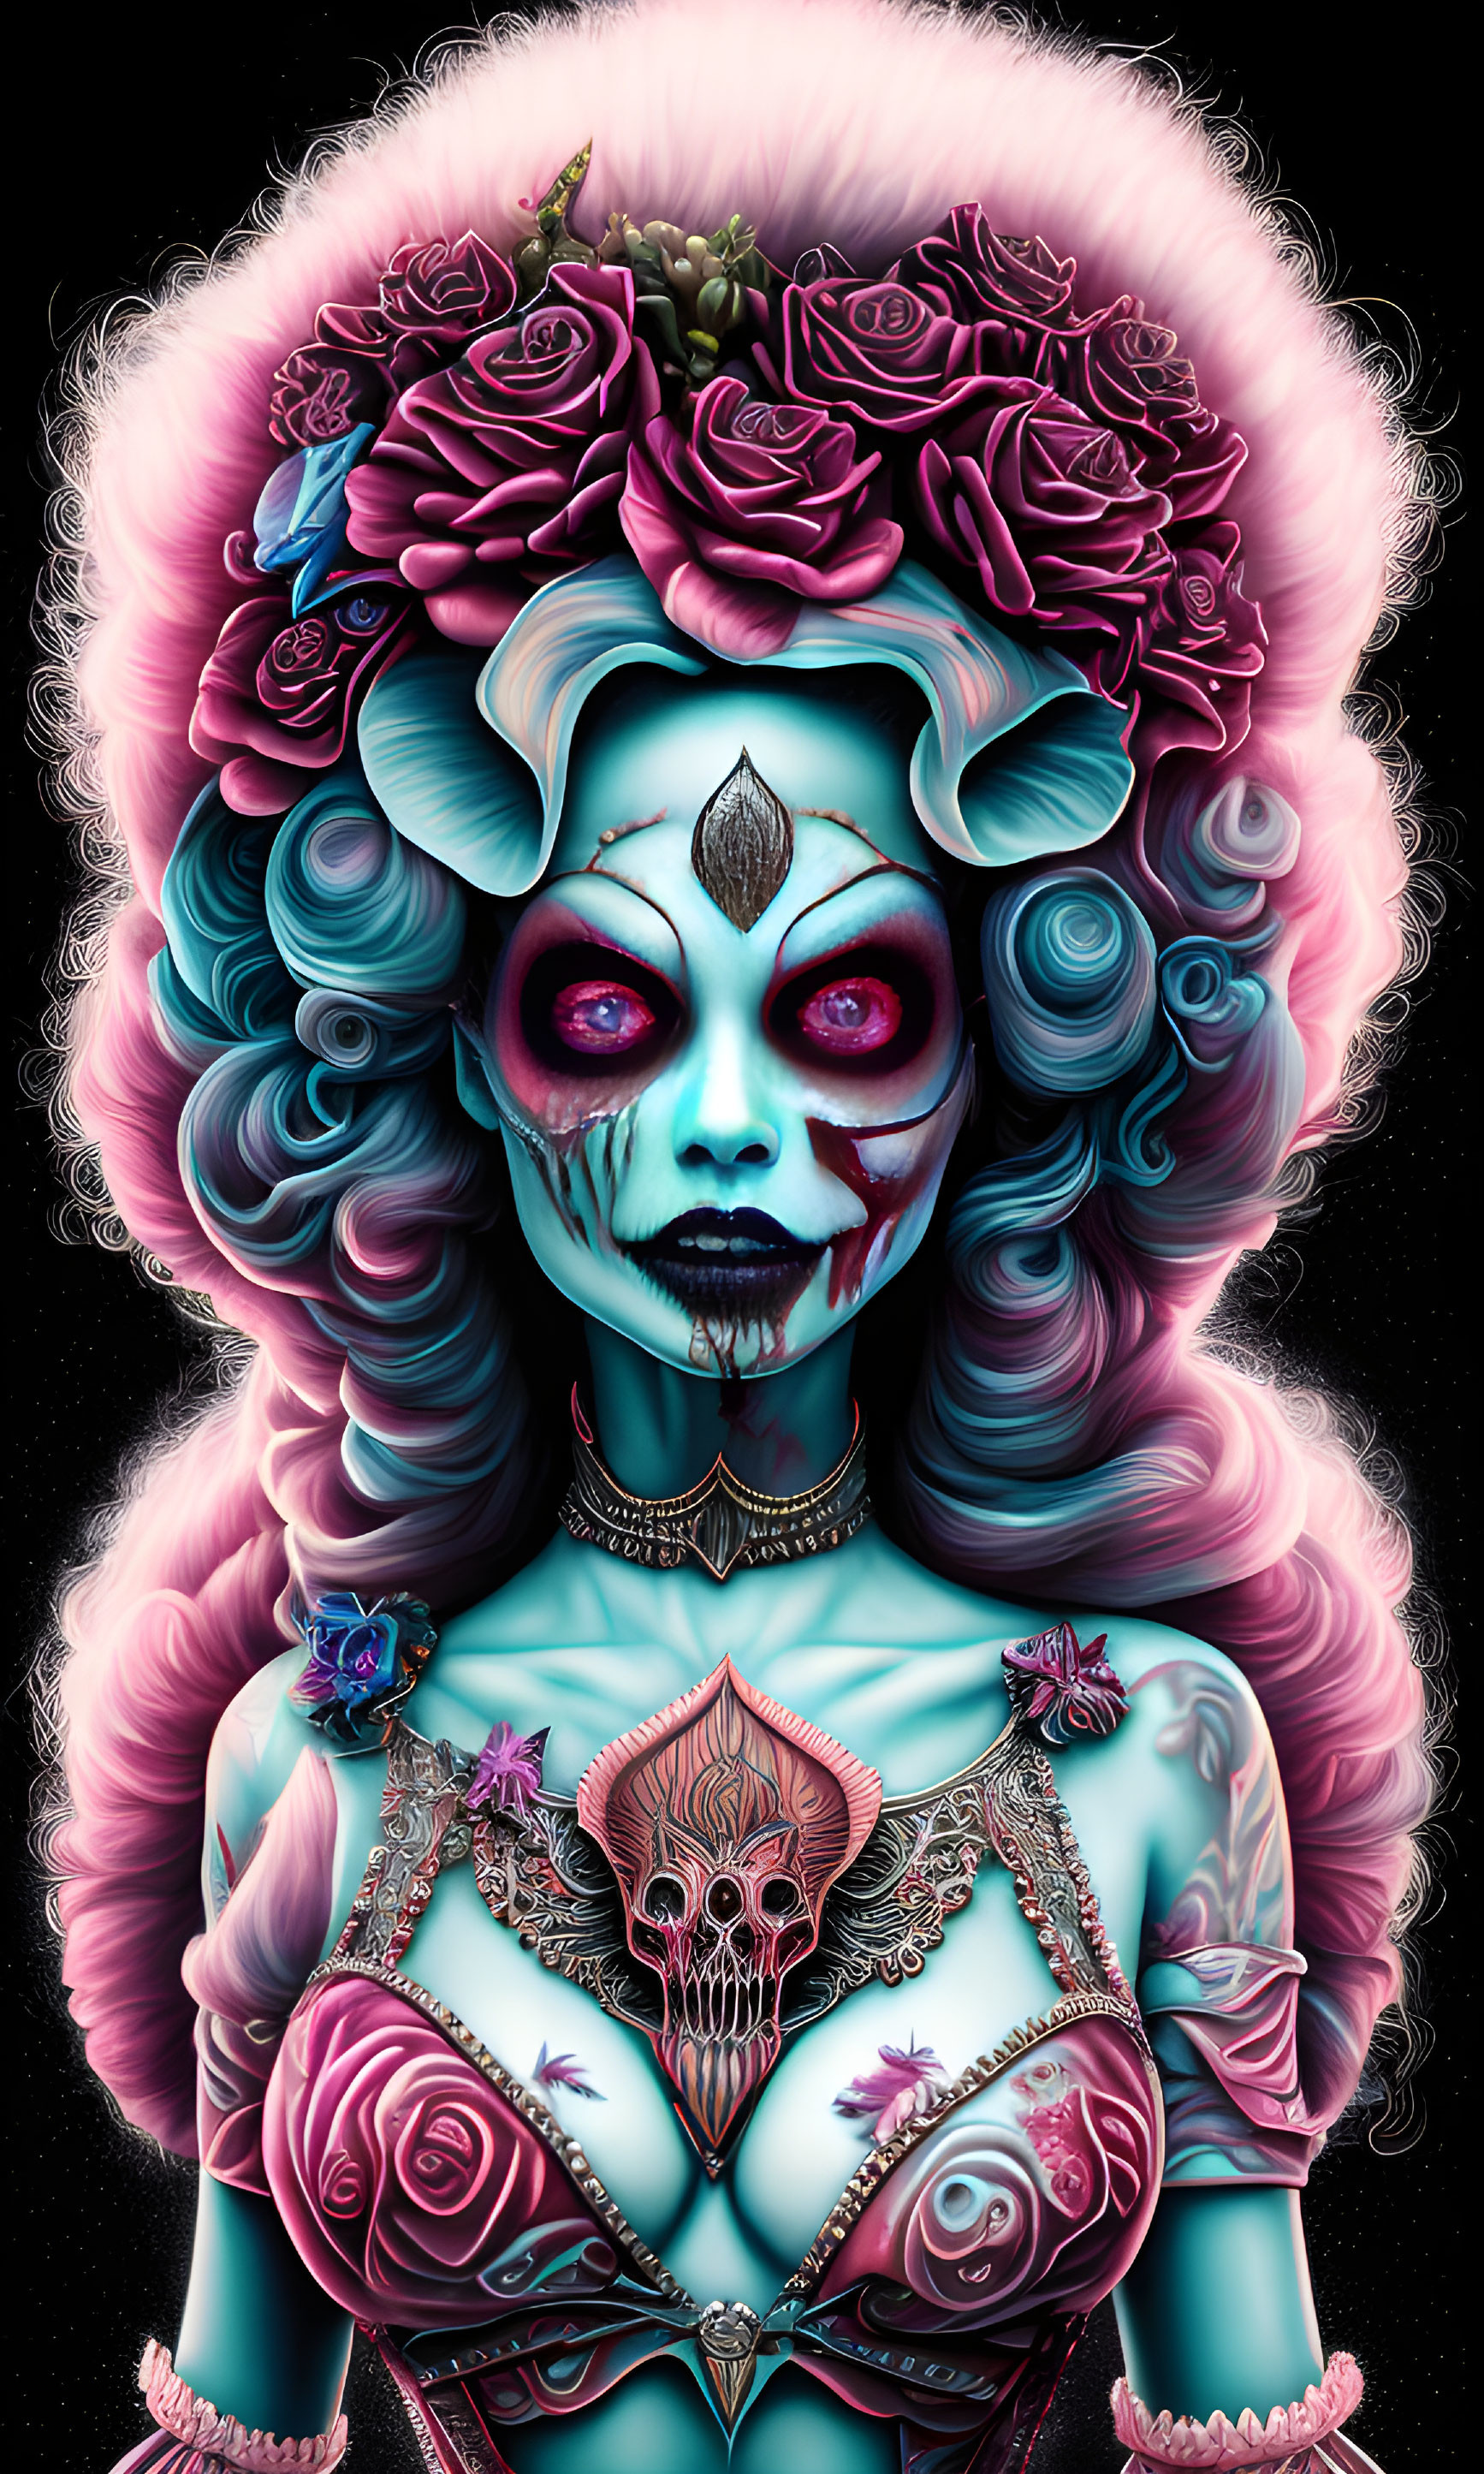 Colorful Female Figure with Skeleton Makeup and Third Eye Portrait